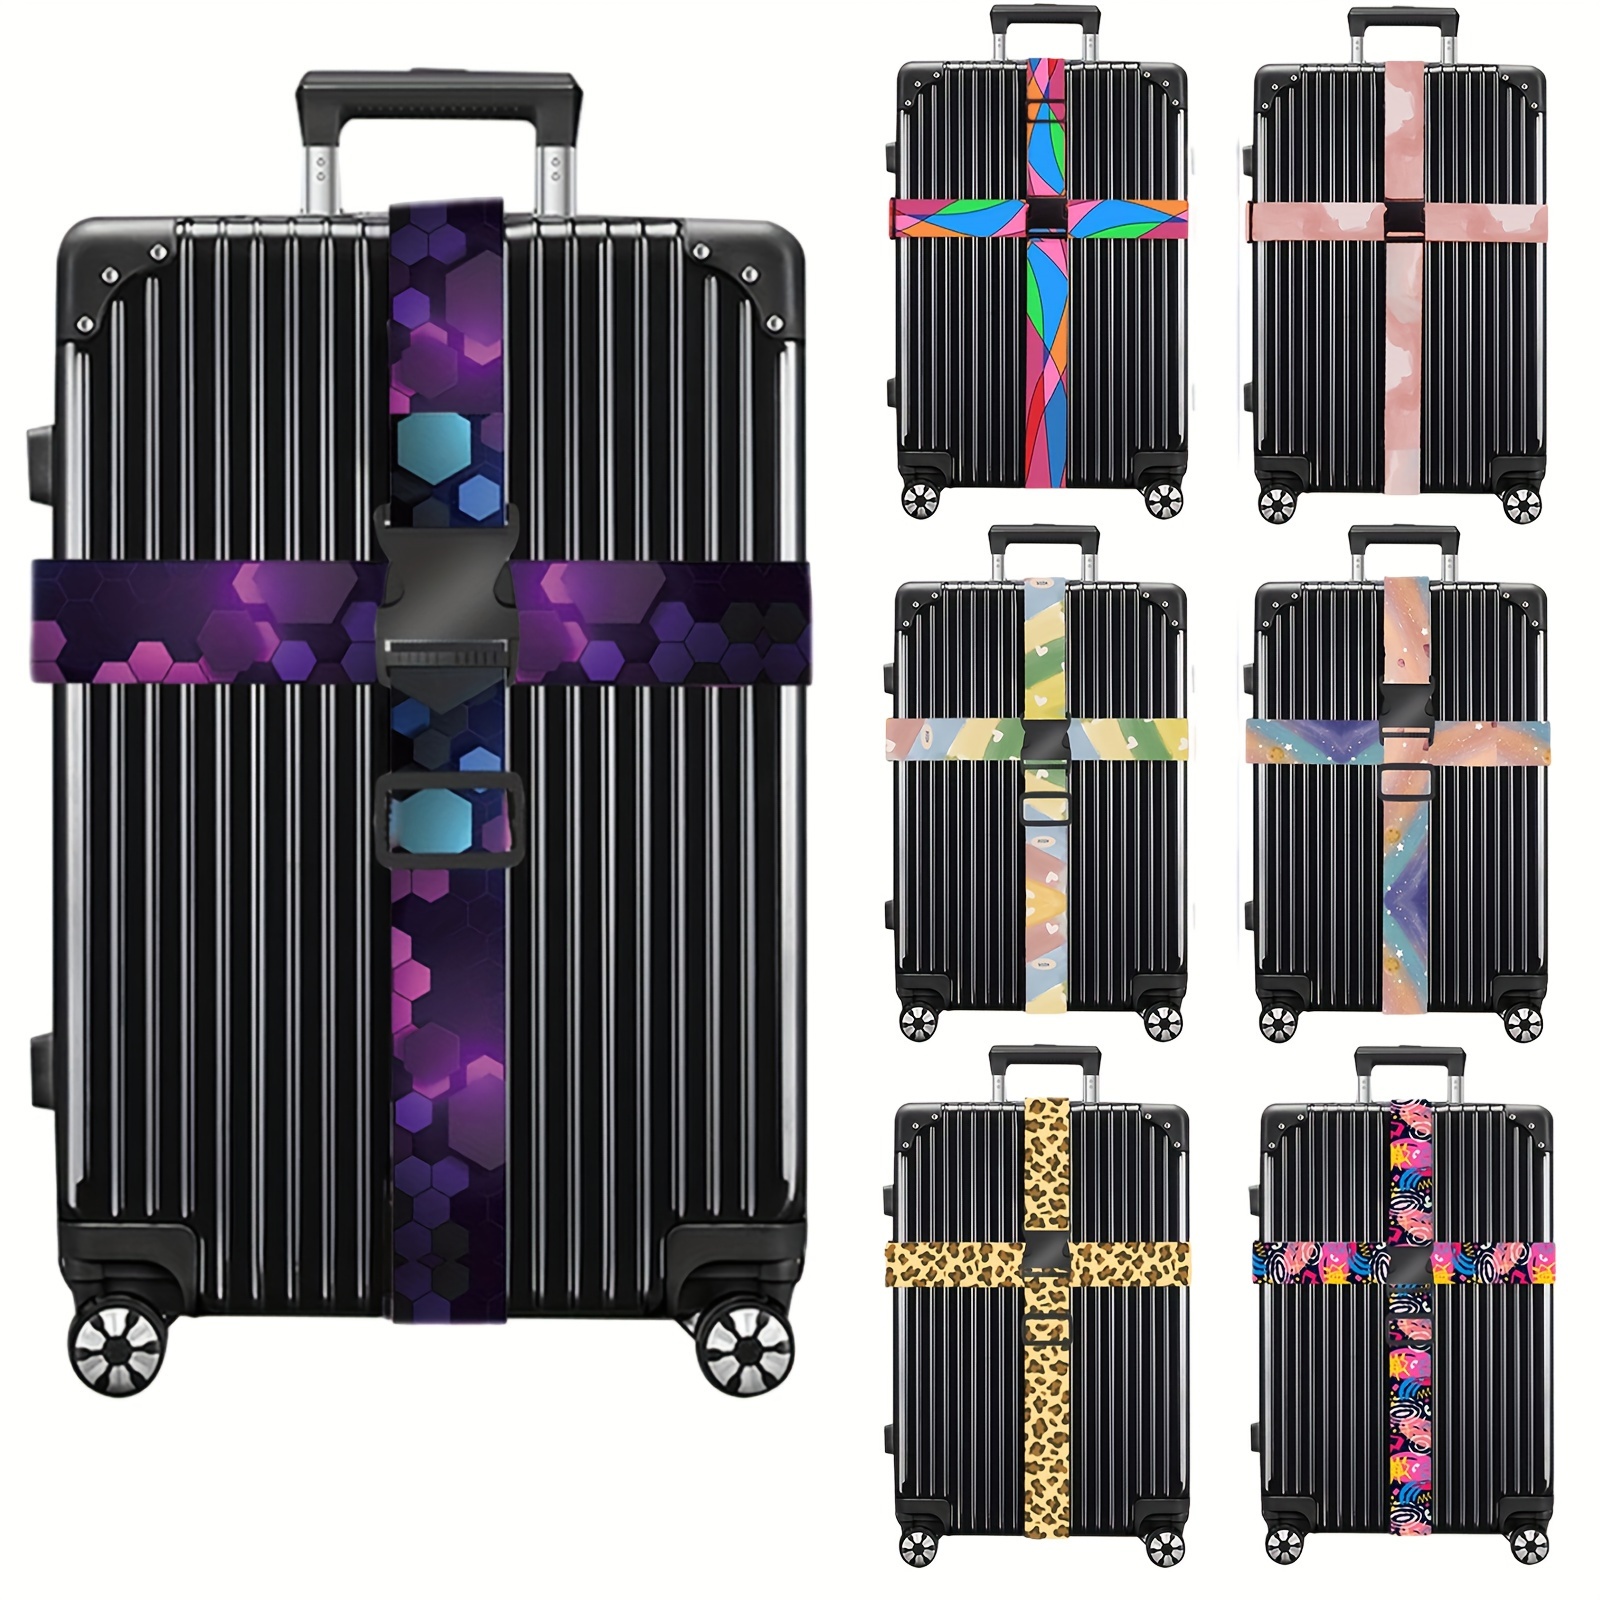 4 Pack Luggage Straps for Suitcases Adjustable Travel Luggage Strap  Suitcase Belt with Quick Release Buckle Travel Bag Accessories for Business